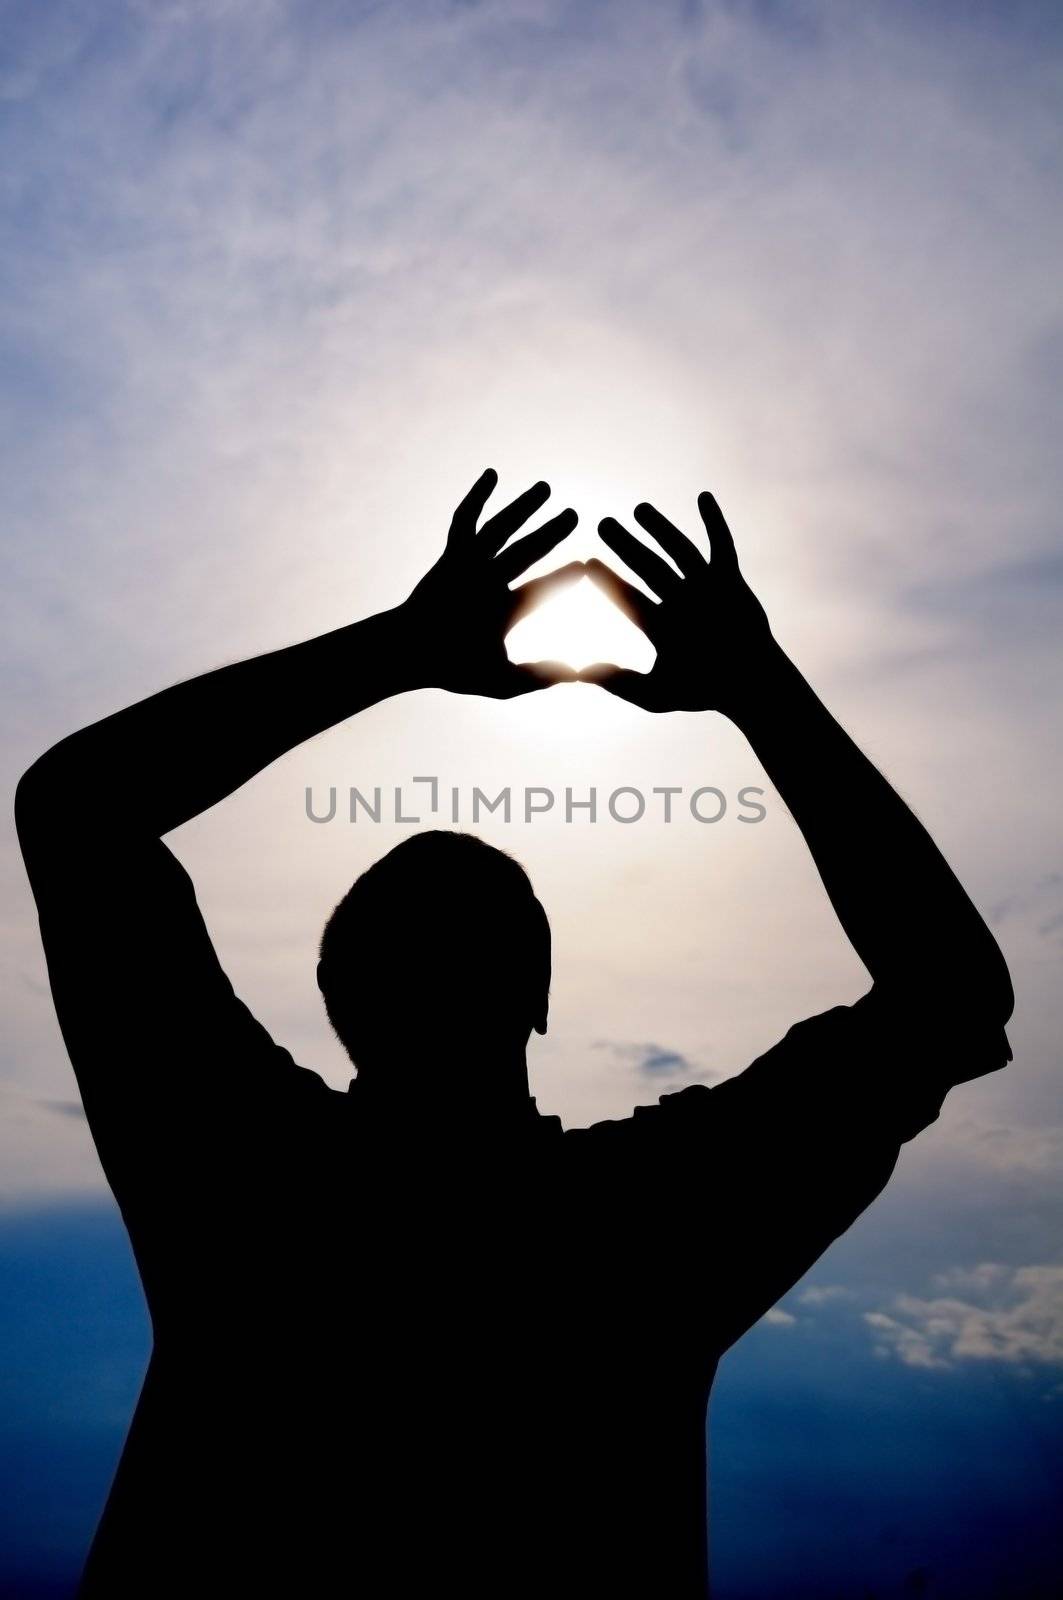 Male is holding the sun in his hands with heart symbol